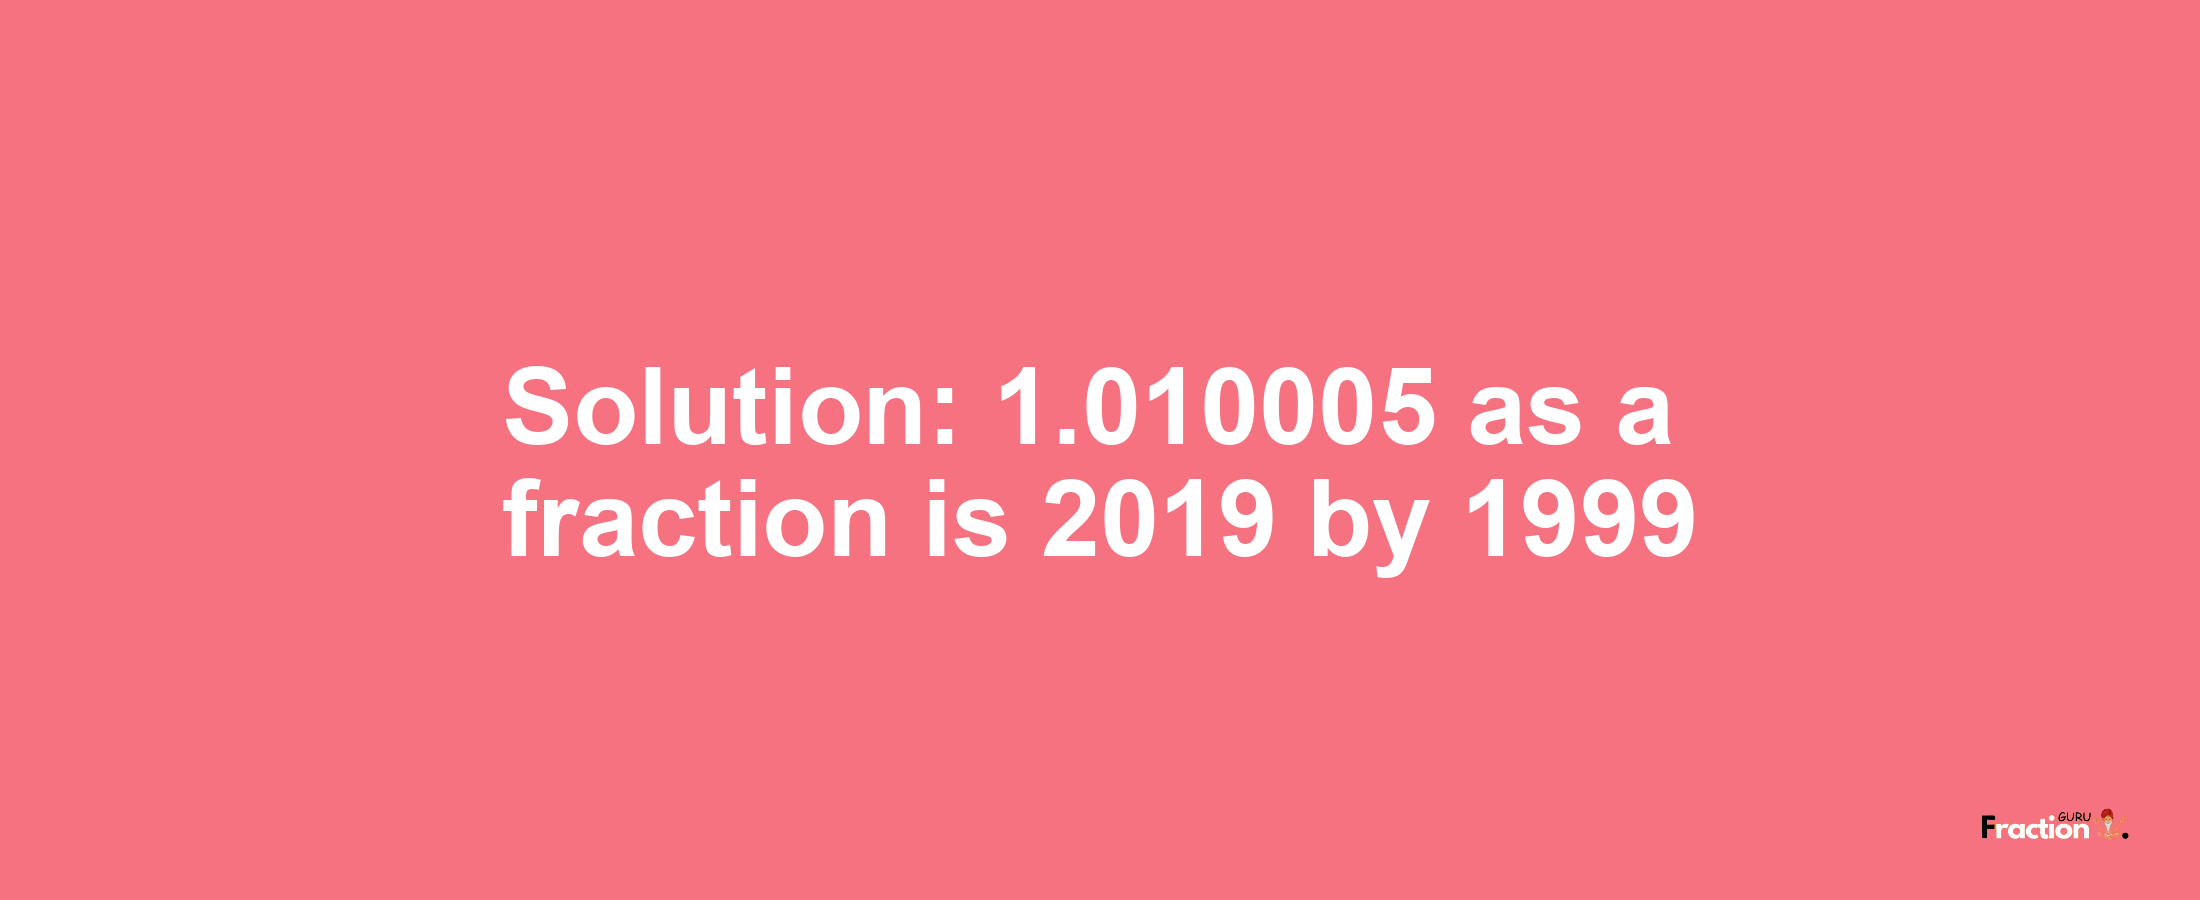 Solution:1.010005 as a fraction is 2019/1999